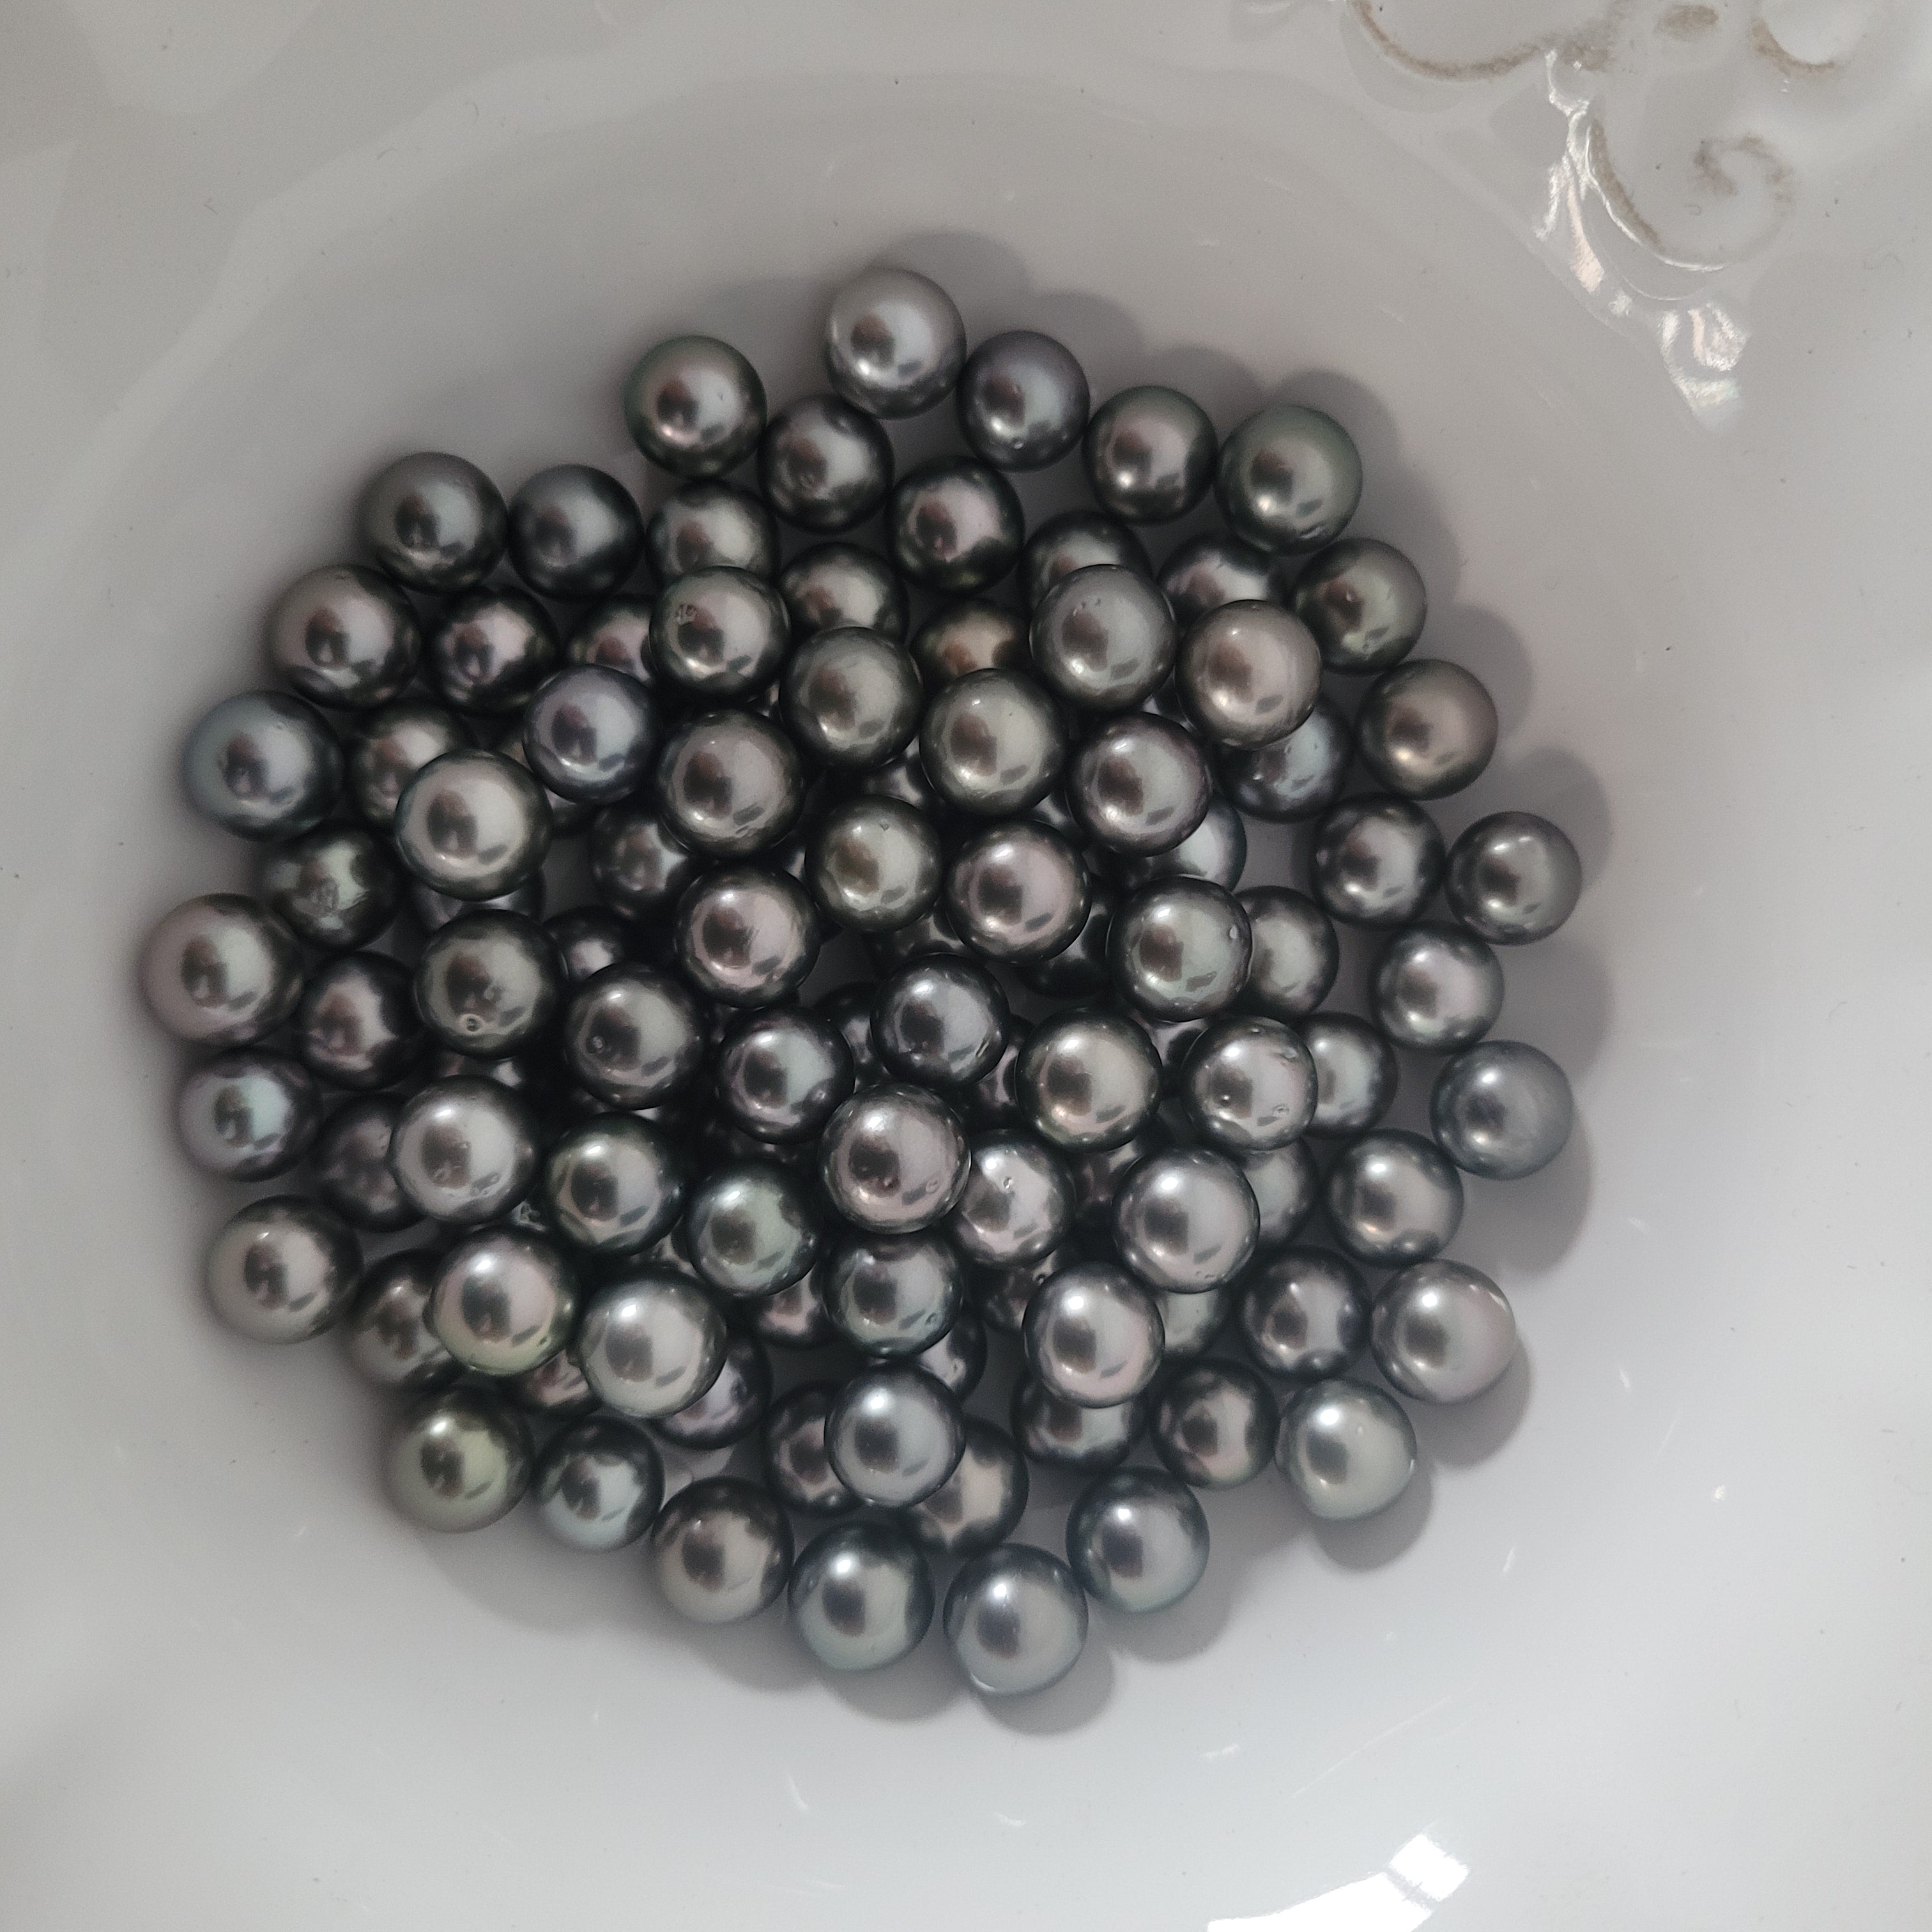 Center Drilled Black Loose Pearls / 8mm or 10mm Loose Shell Pearls